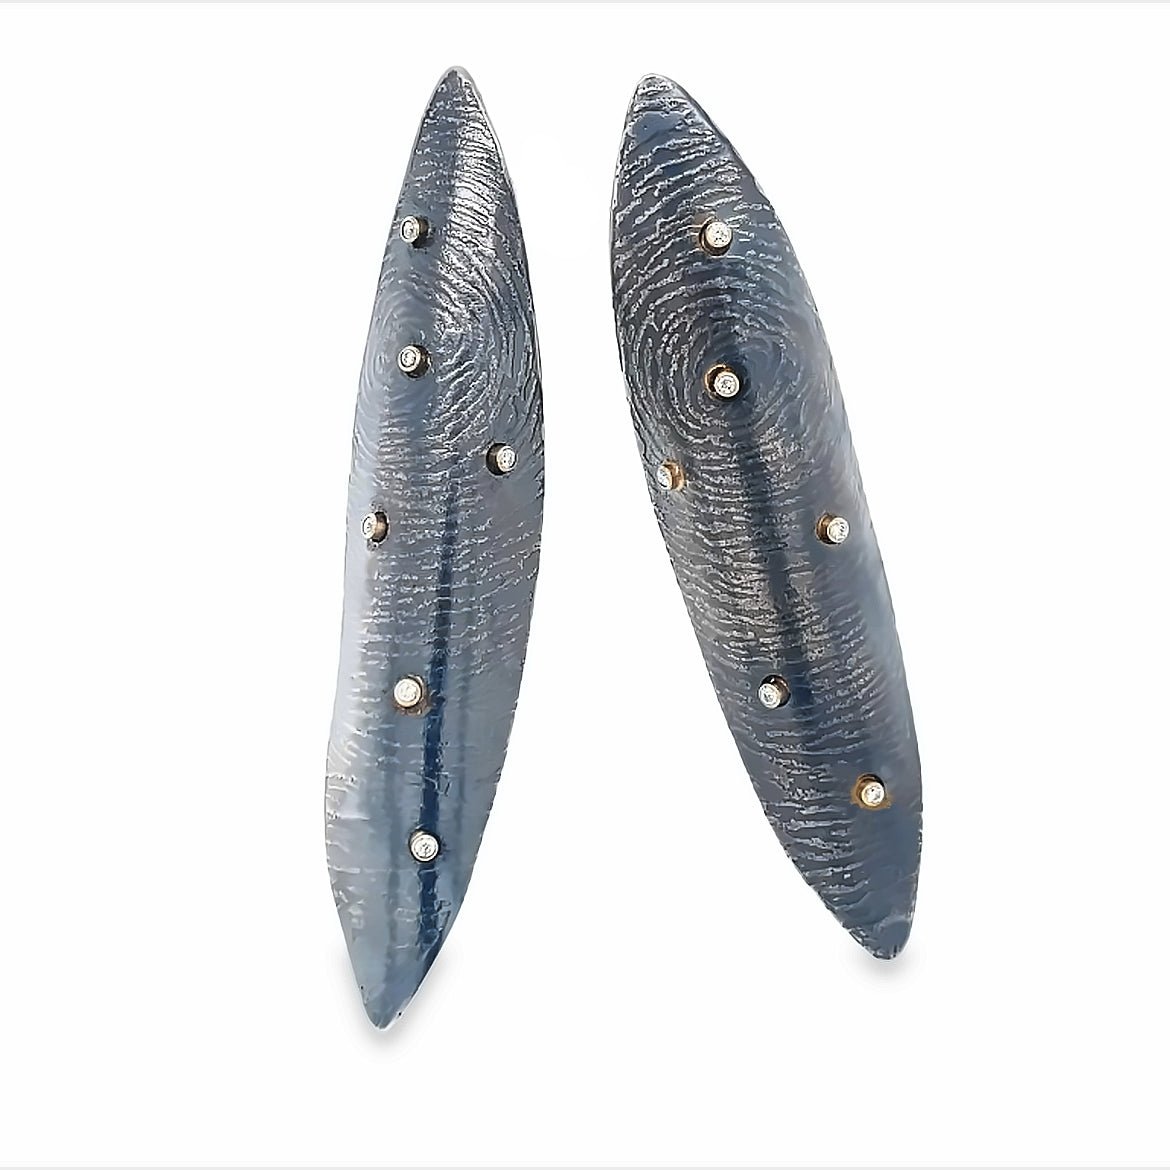 Perforated Pierced Earrings — Jewelry Artist and Metalsmith Leigh